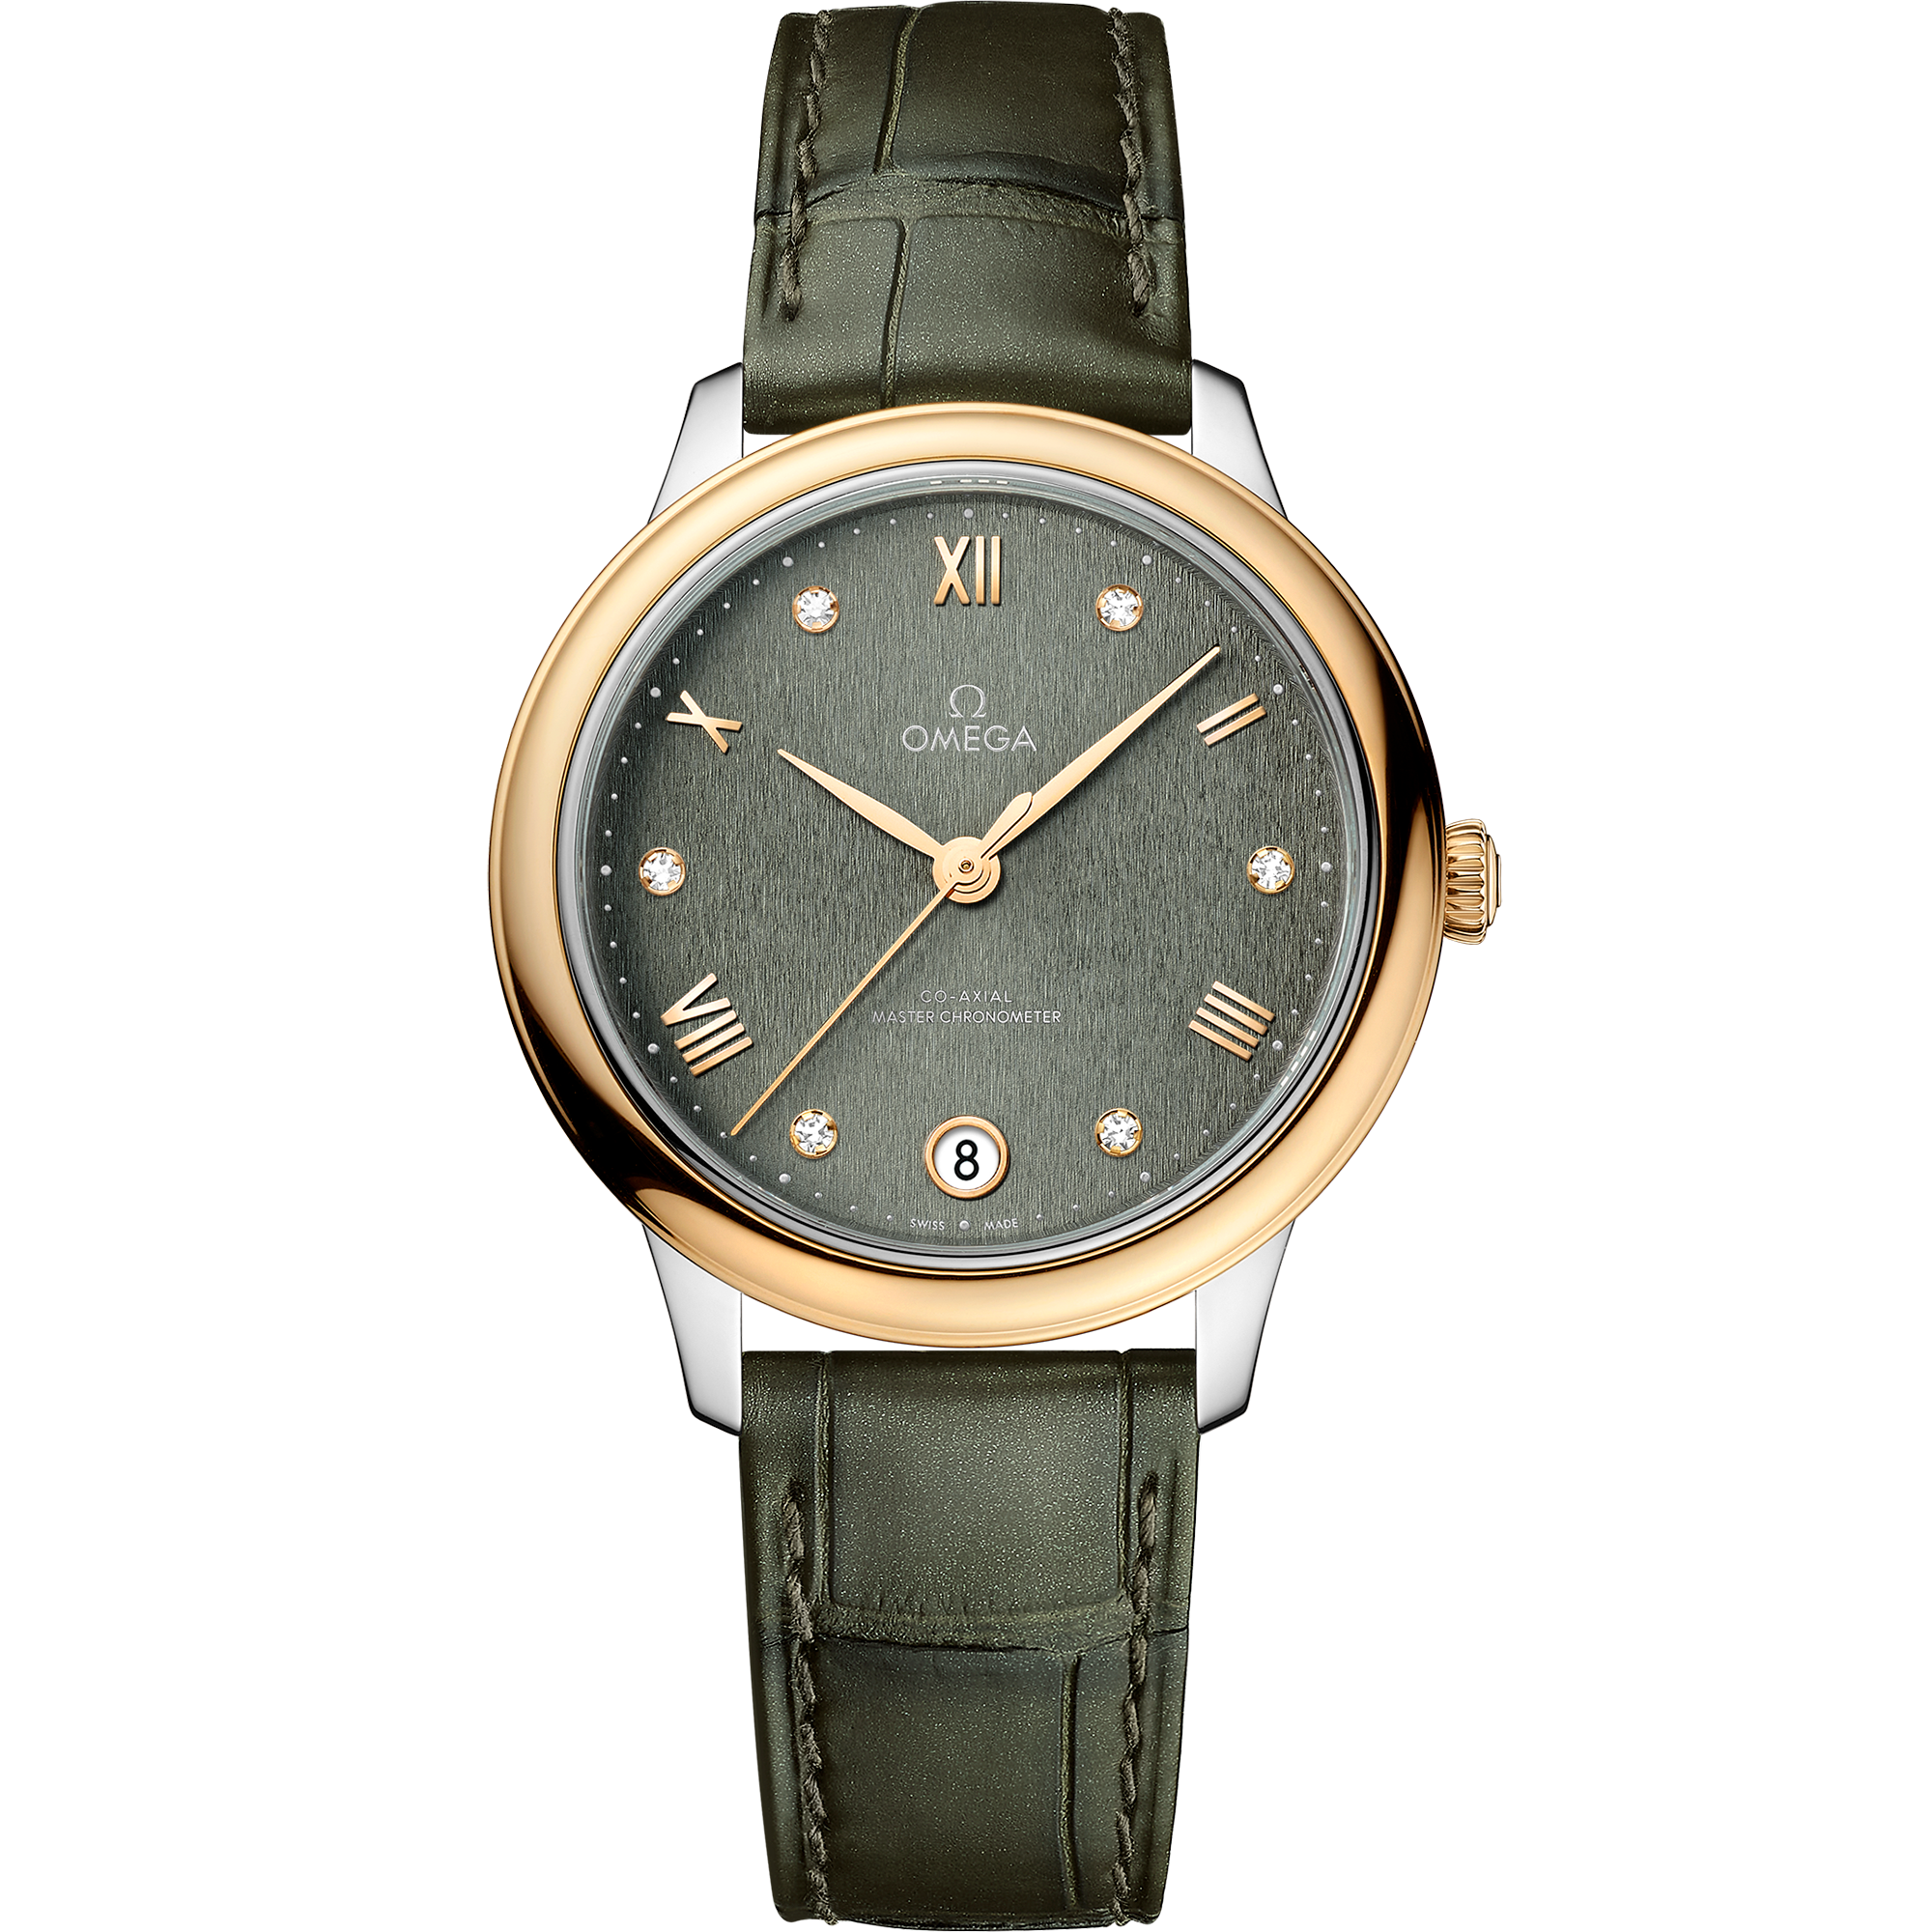 De Ville 34 mm, steel - yellow gold on leather strap - 434.23.34.20.60.001